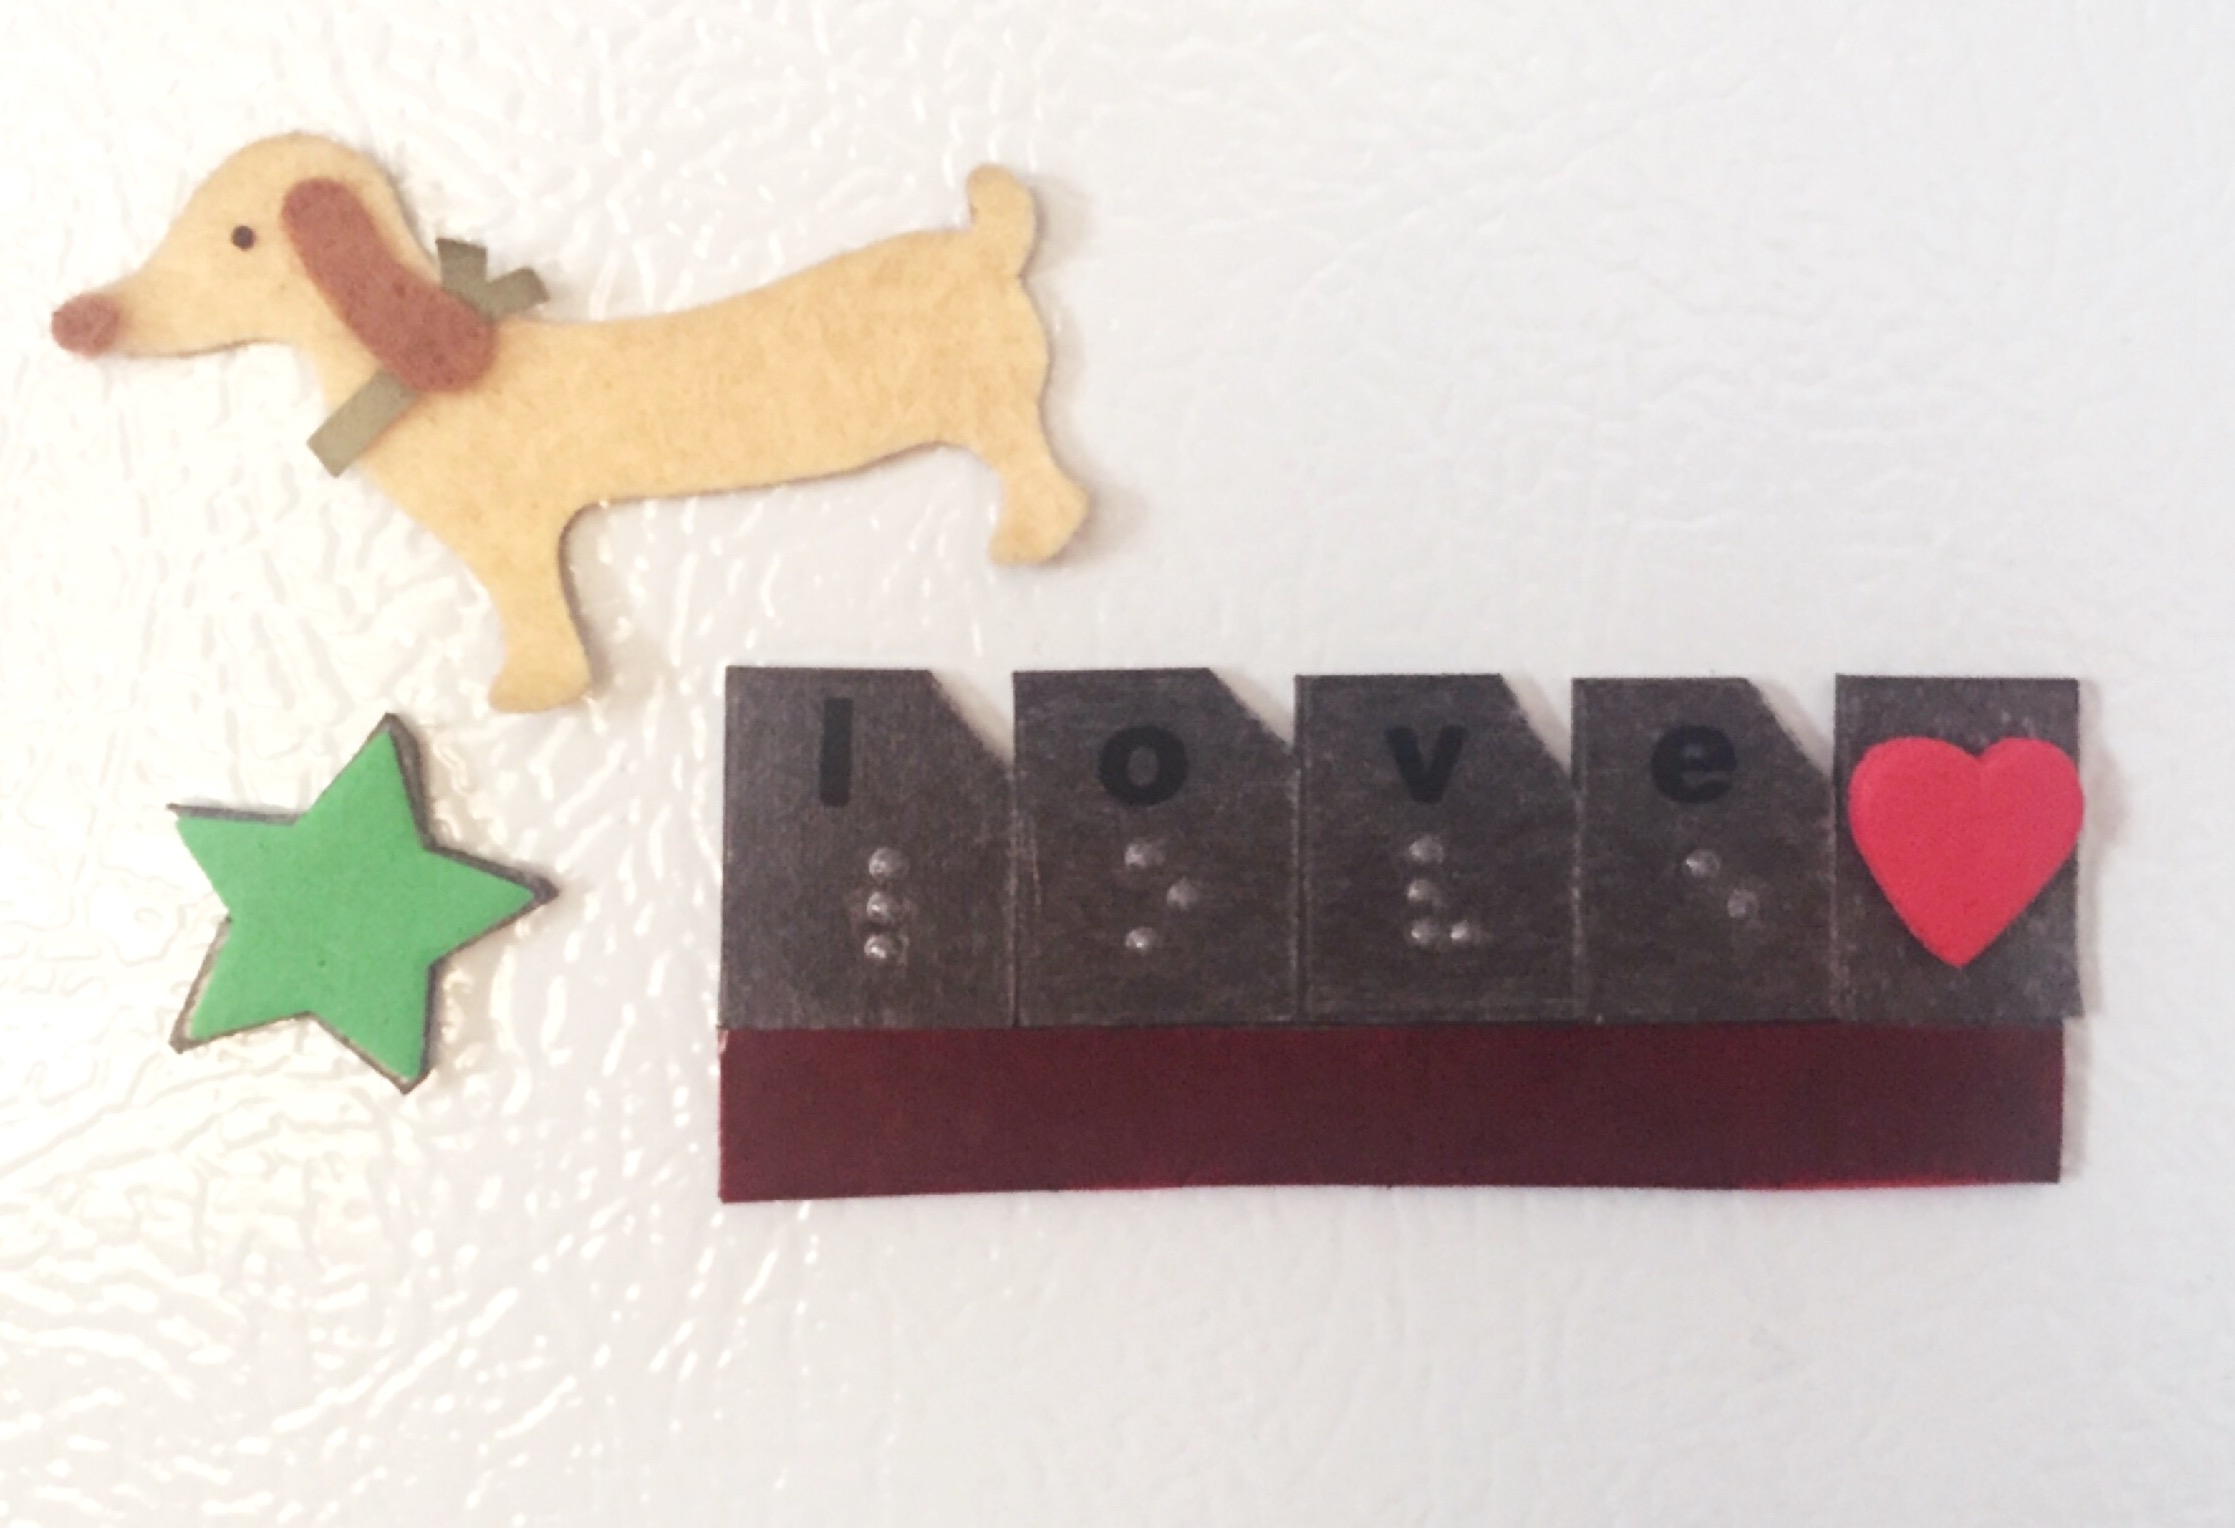 Fridge magnets, braille letters spell love with tactile heart, also star magnet and dachshund magnet